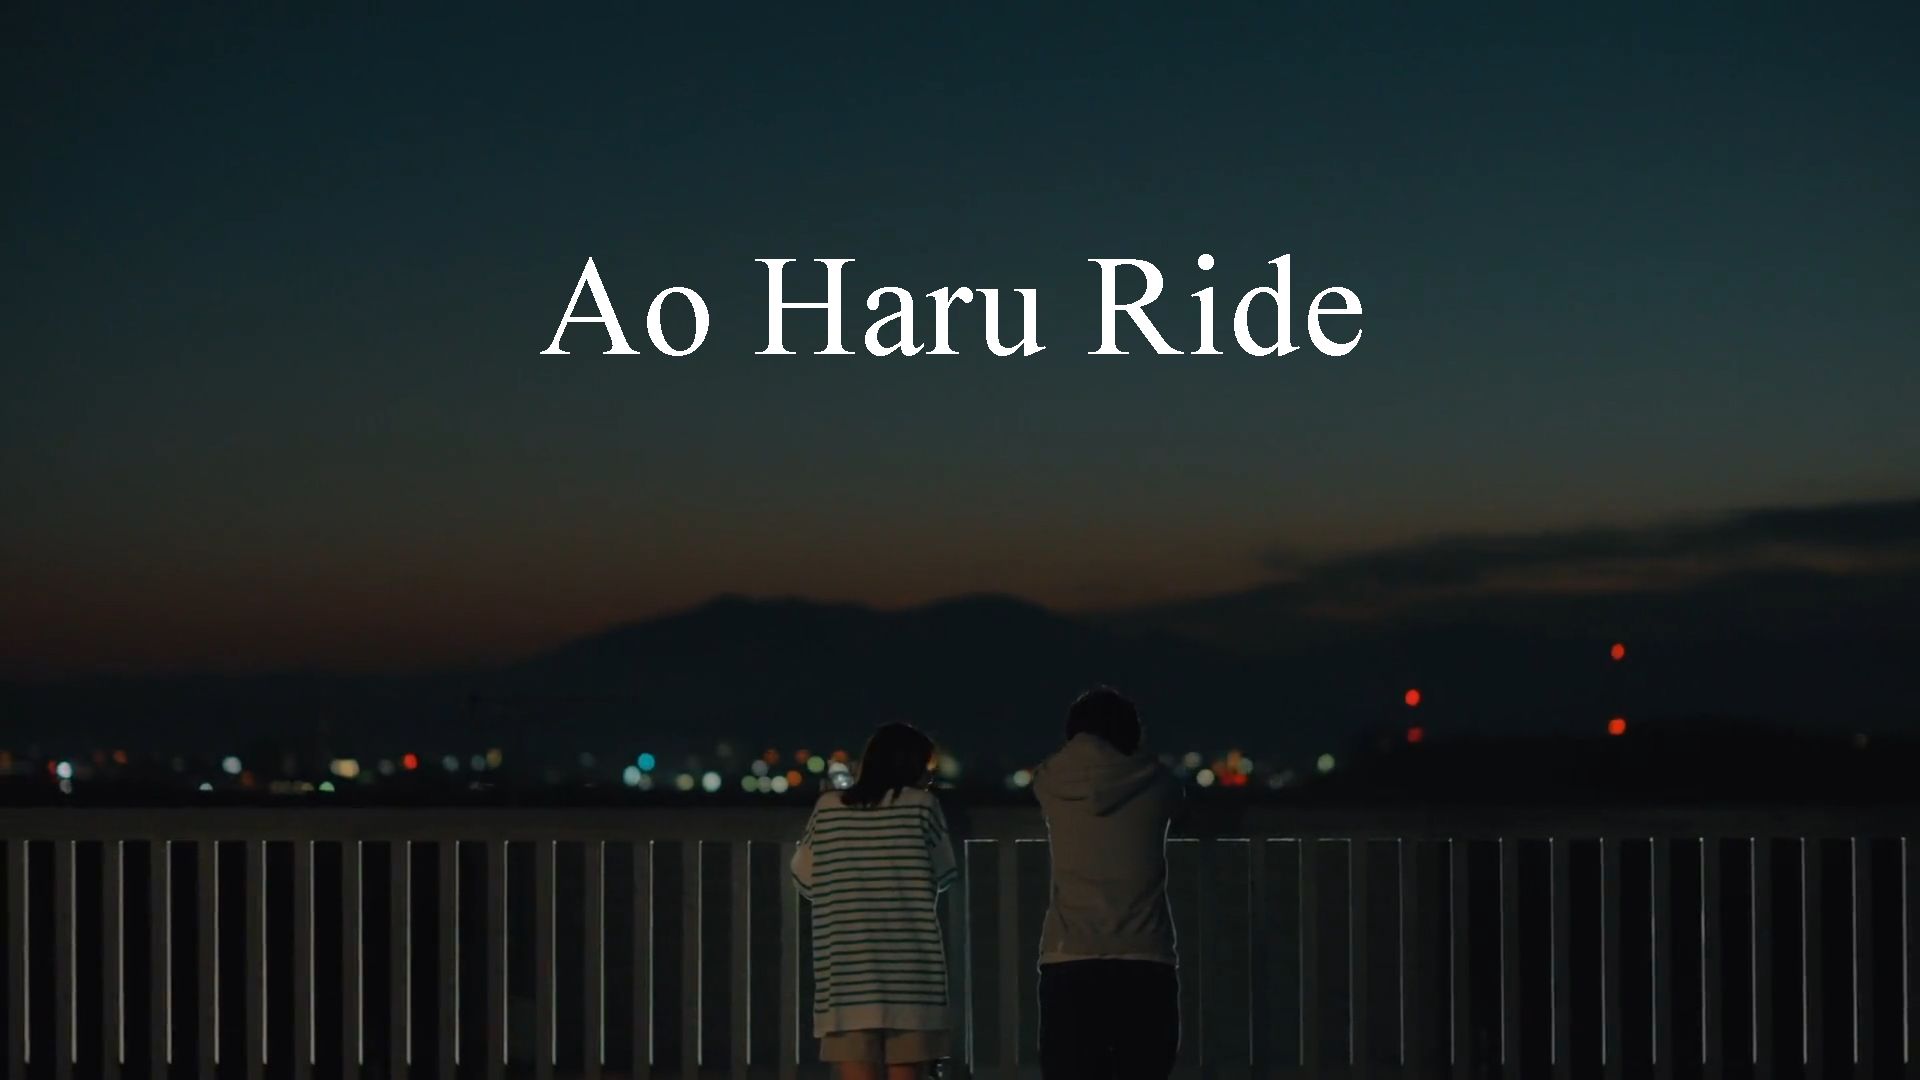 Download Haru Ride All Episode 480p (300MB)